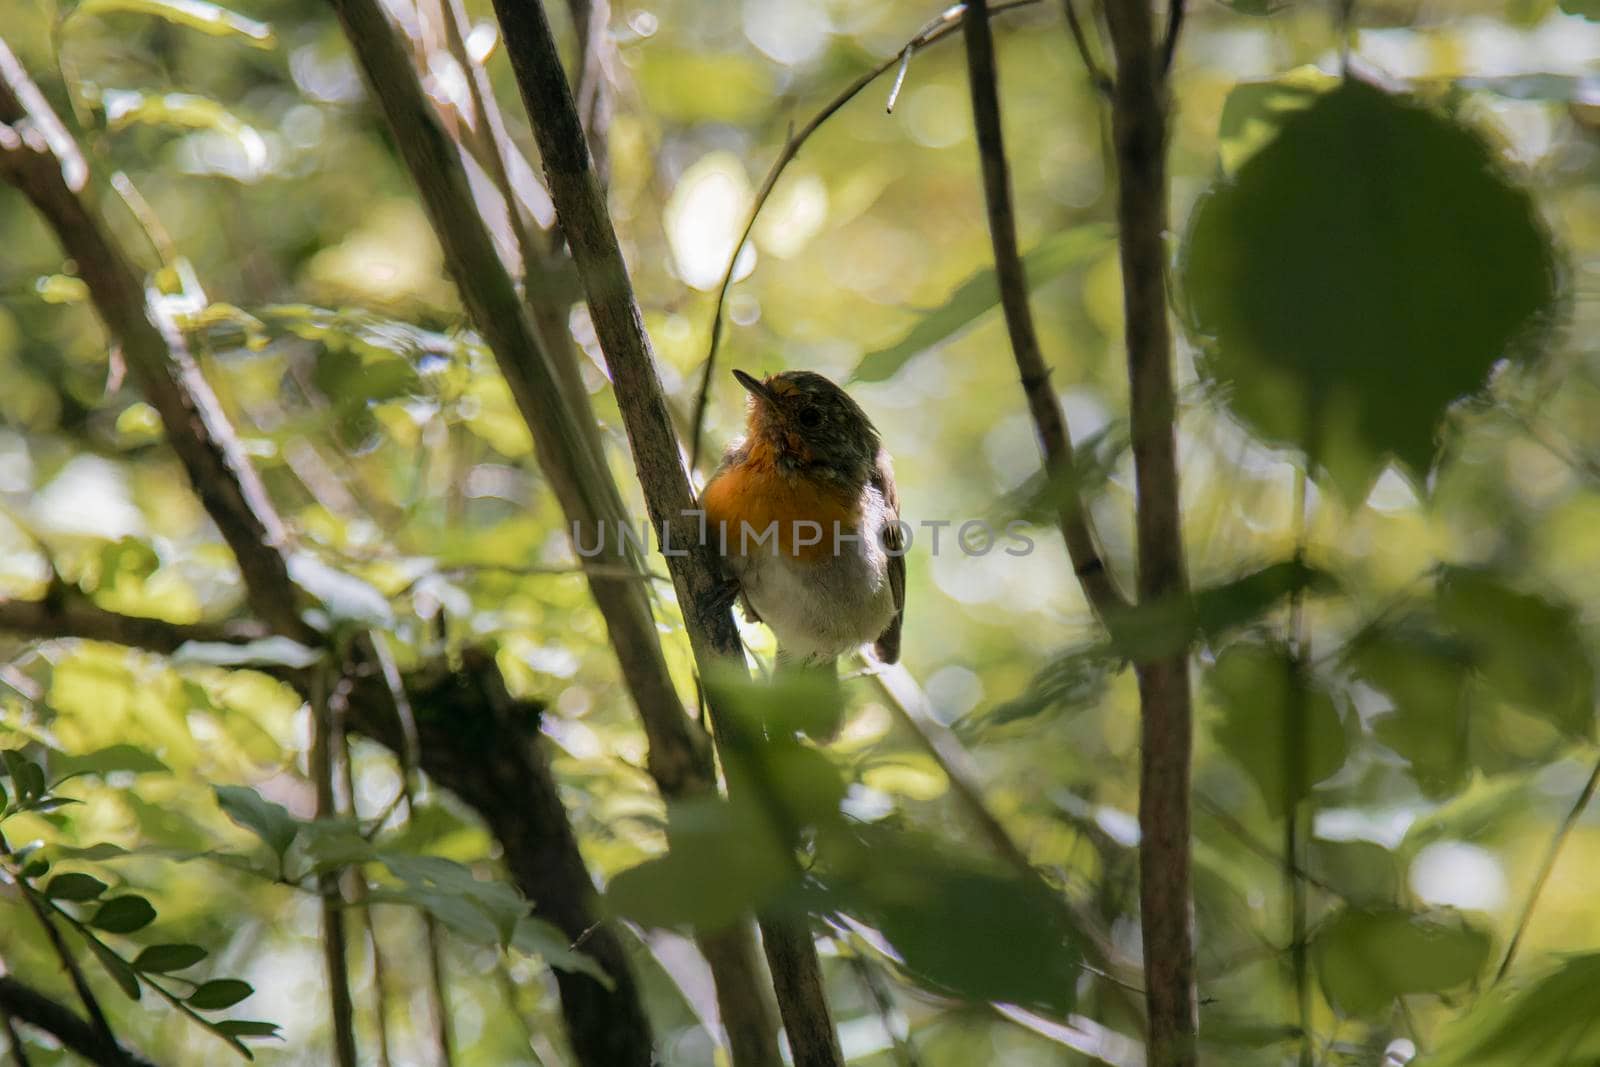 Beautiful small bird among some branches in the forest